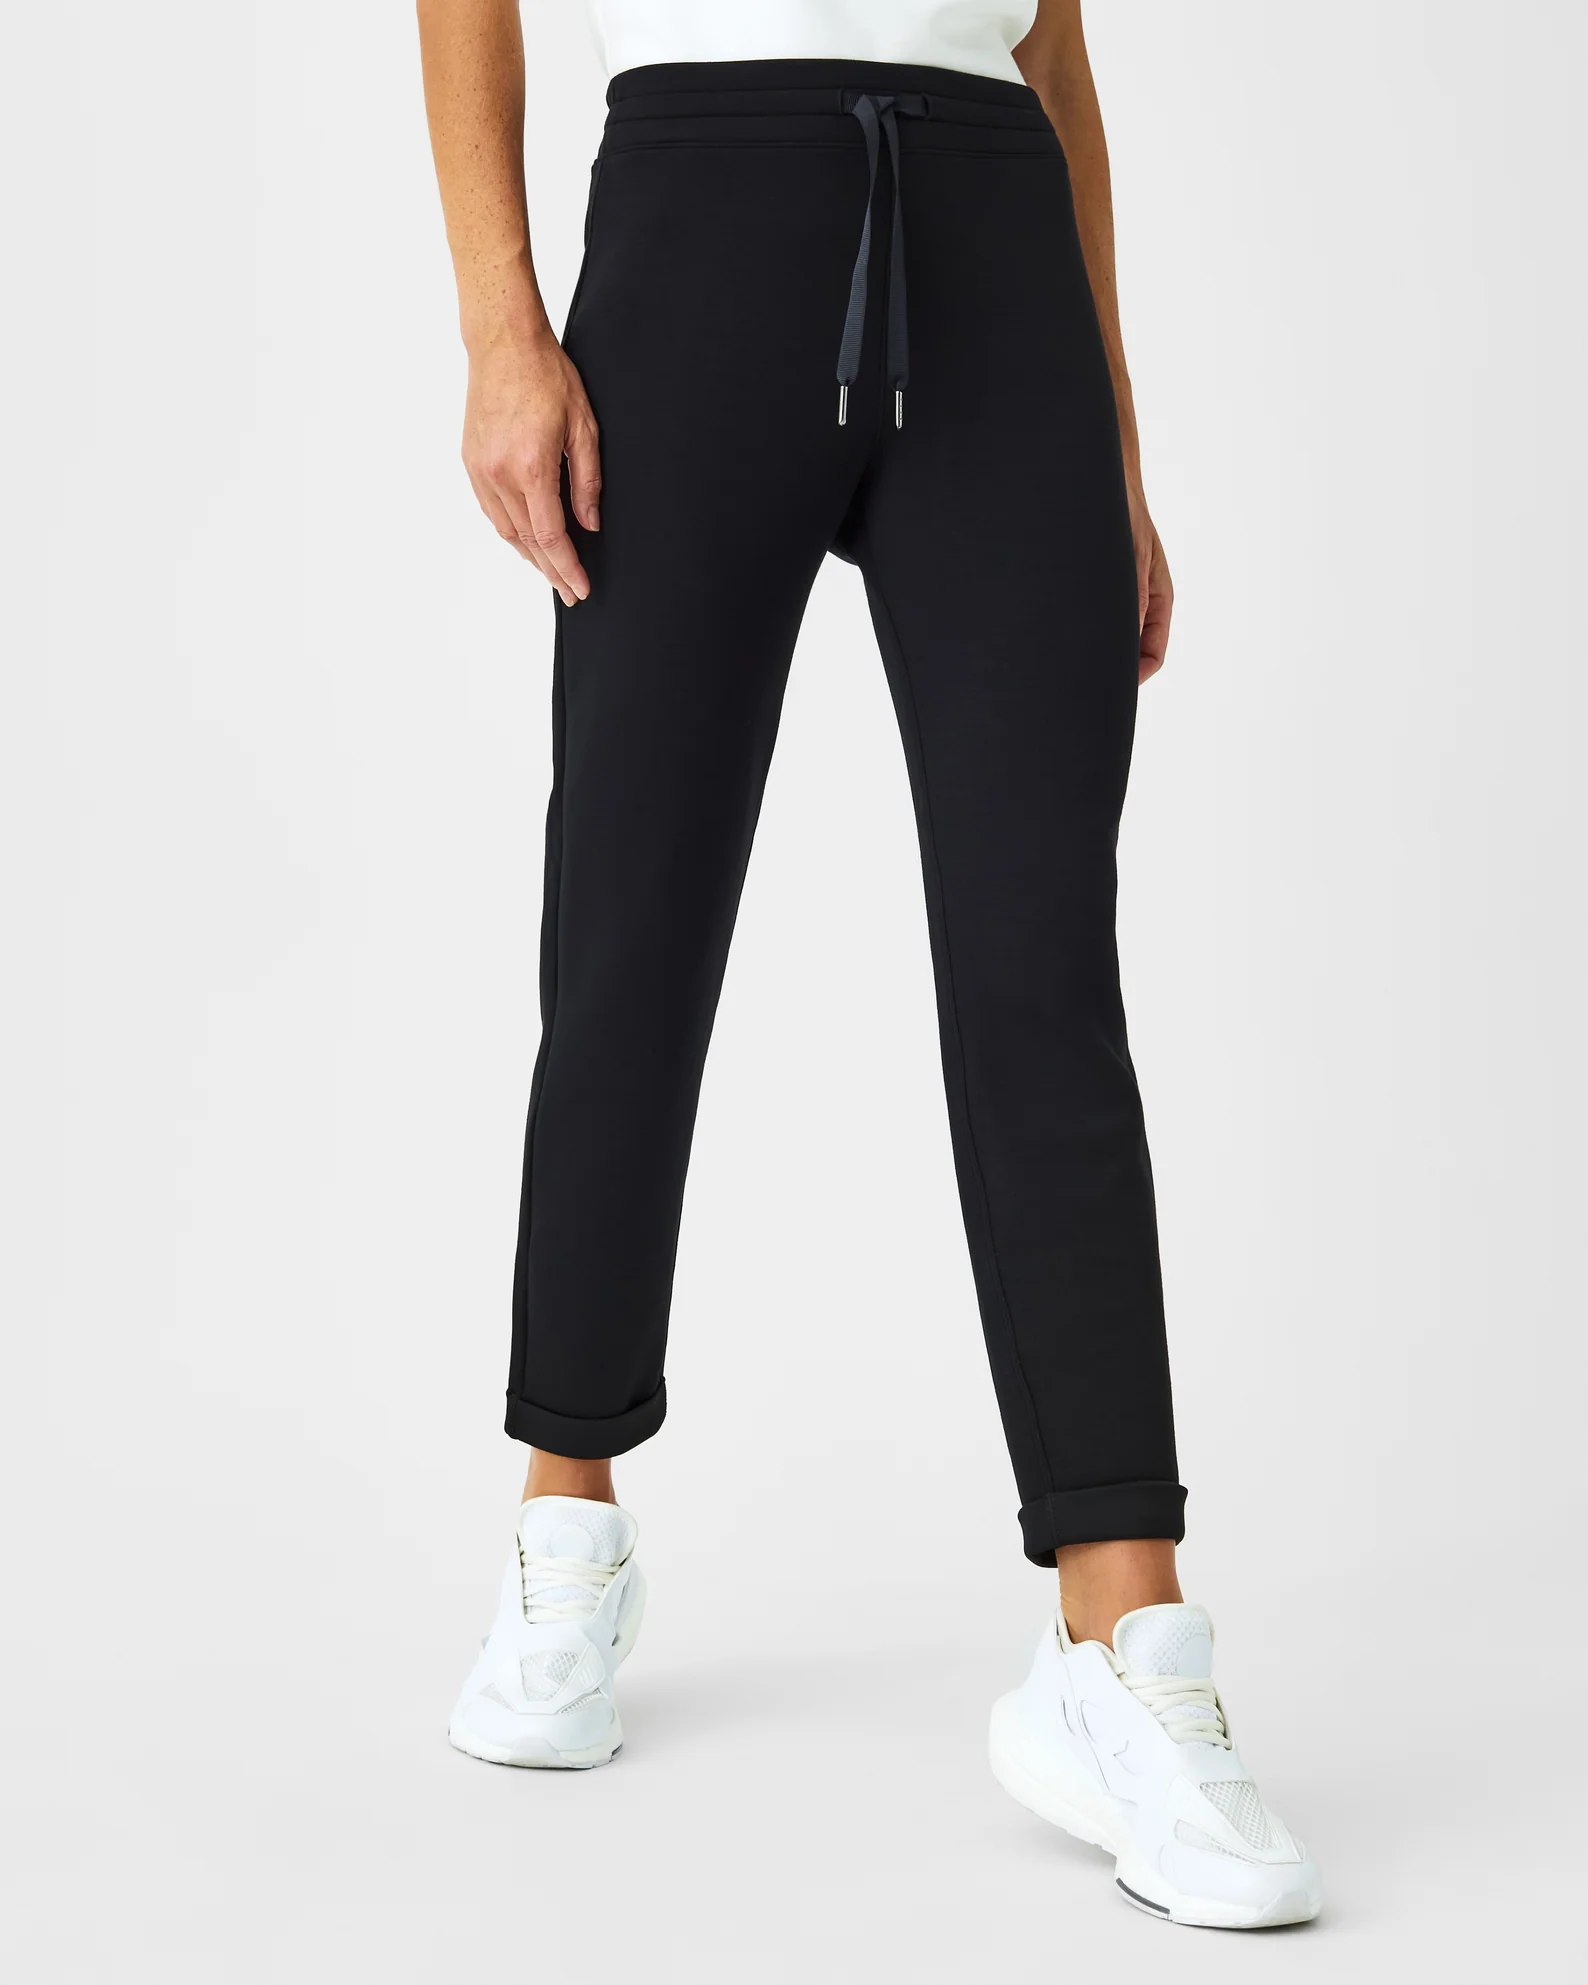 Spanx AirEssentials Tapered Pant - Very Black